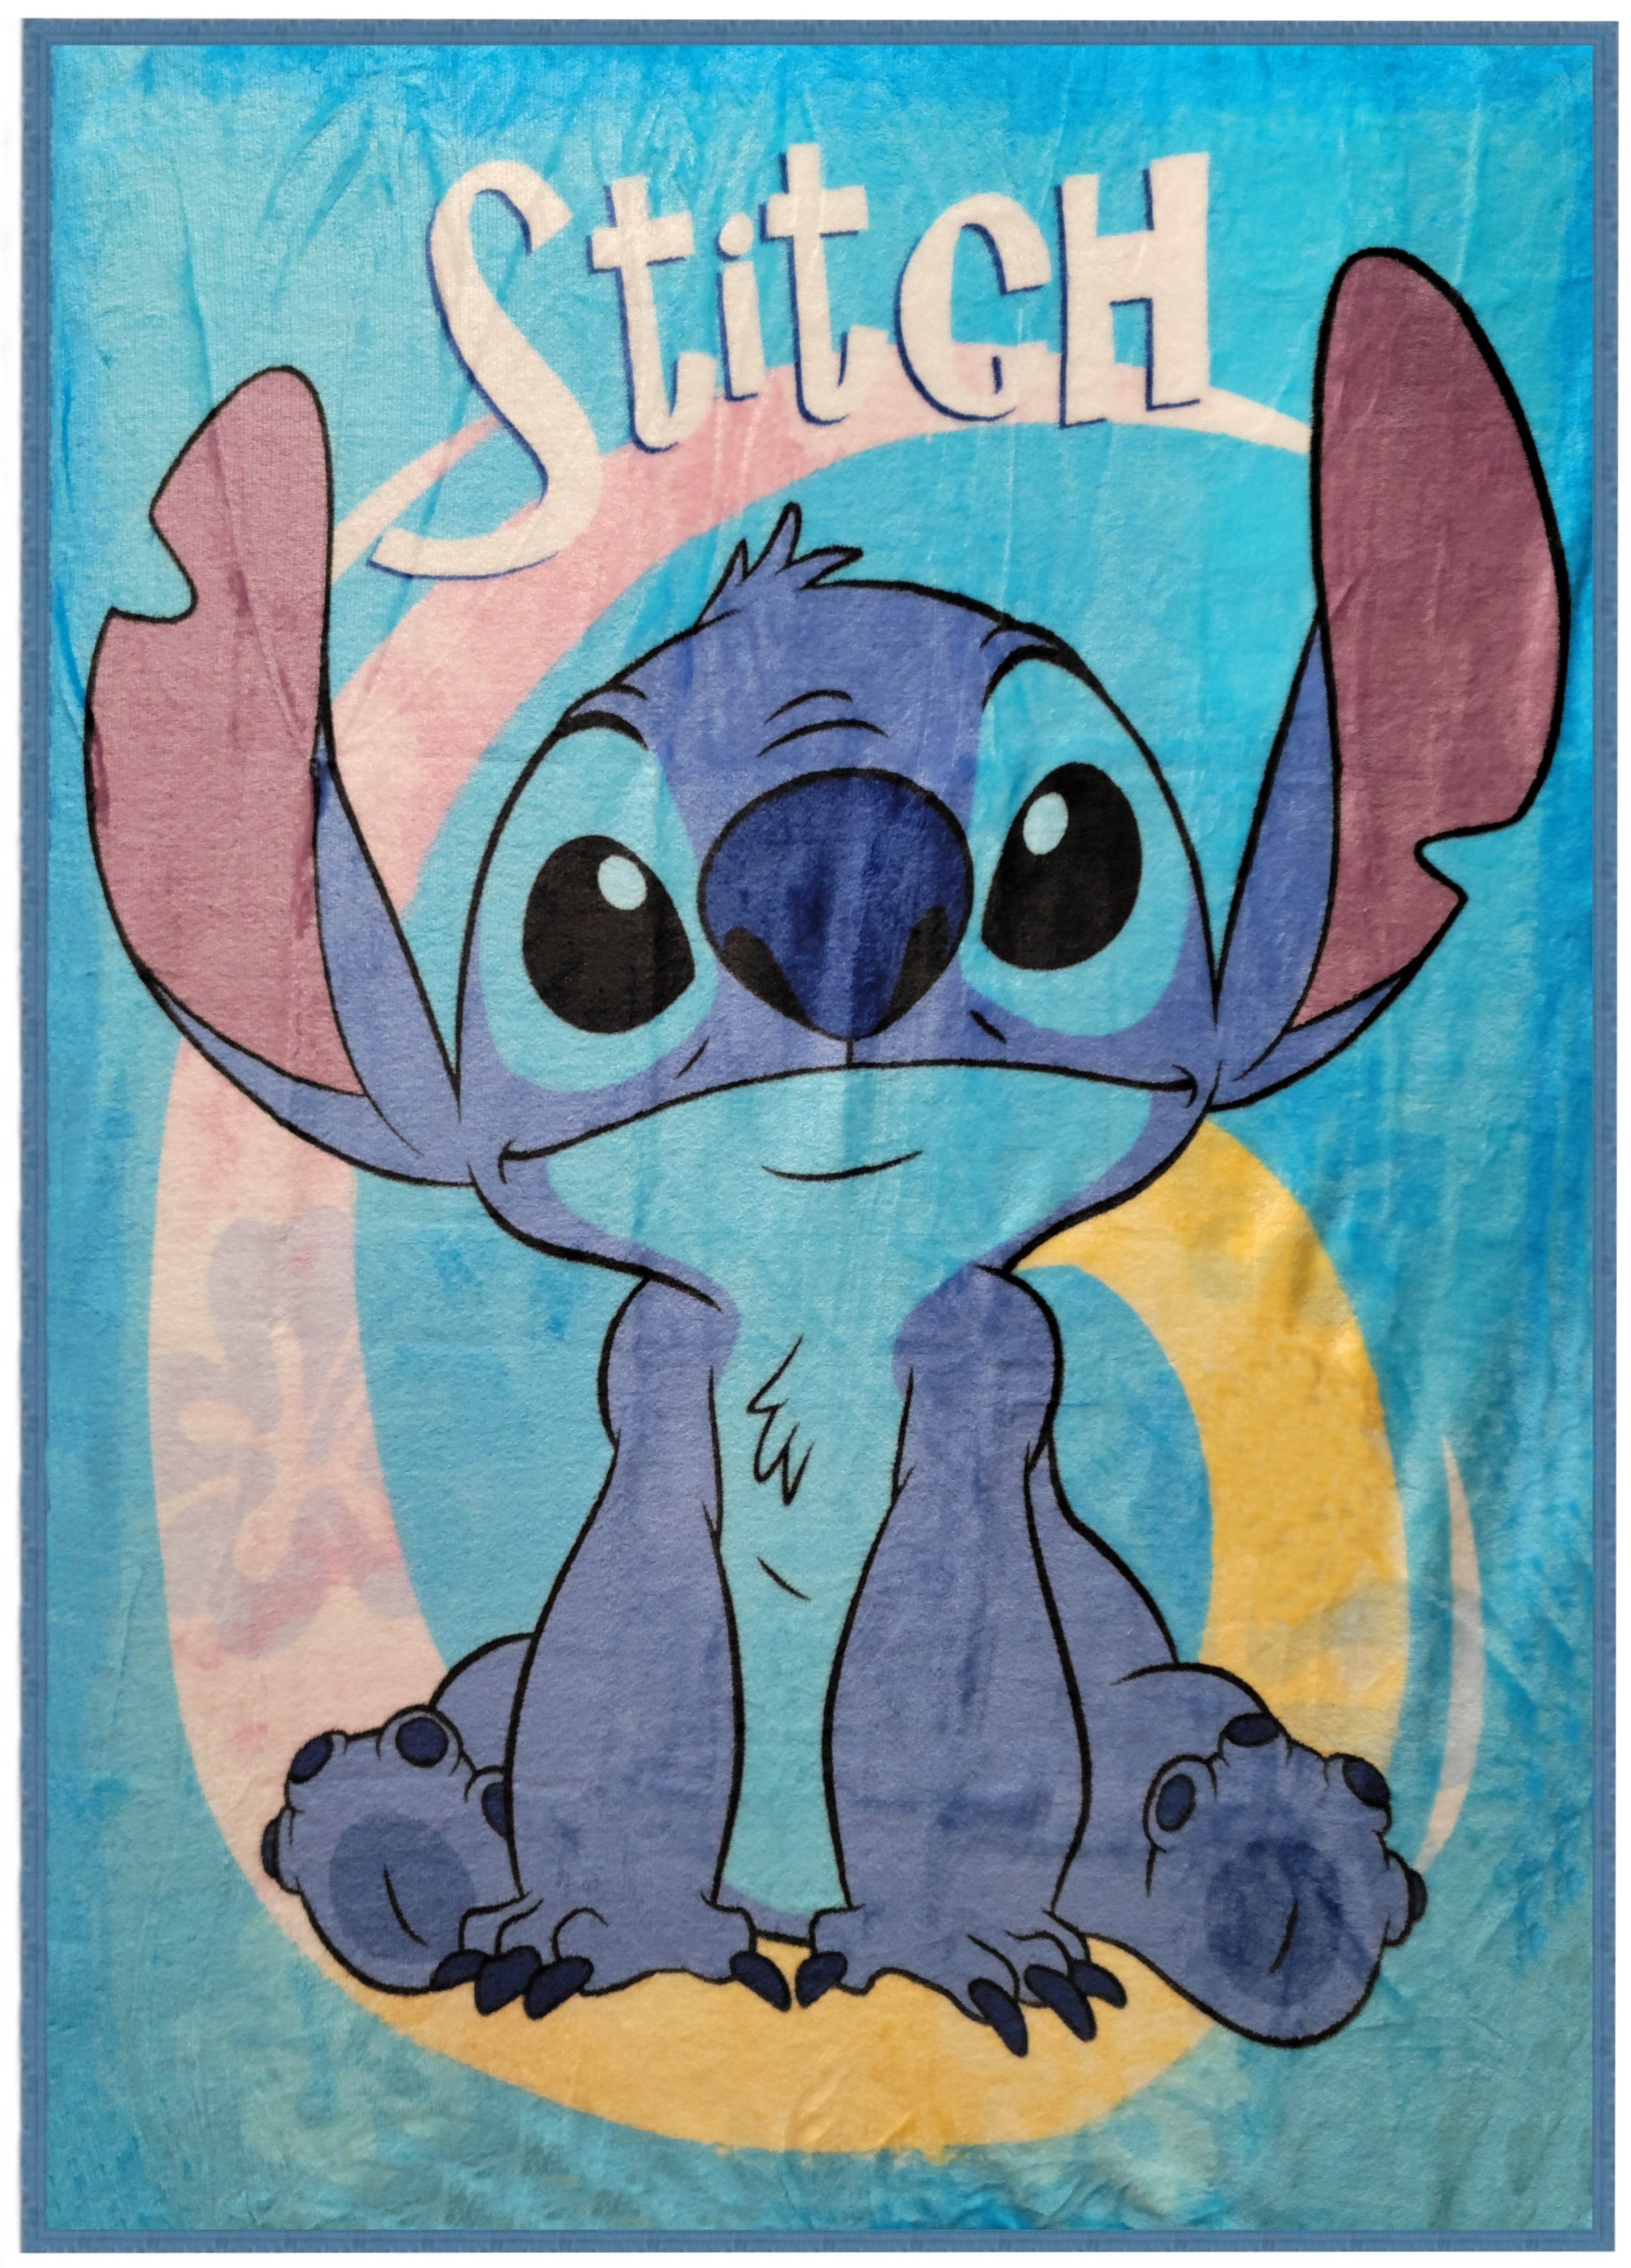 Kids and Toddler Throw Blanket Disney's Lilo & Stitch. Super Soft and Cozy. 40x50 inches